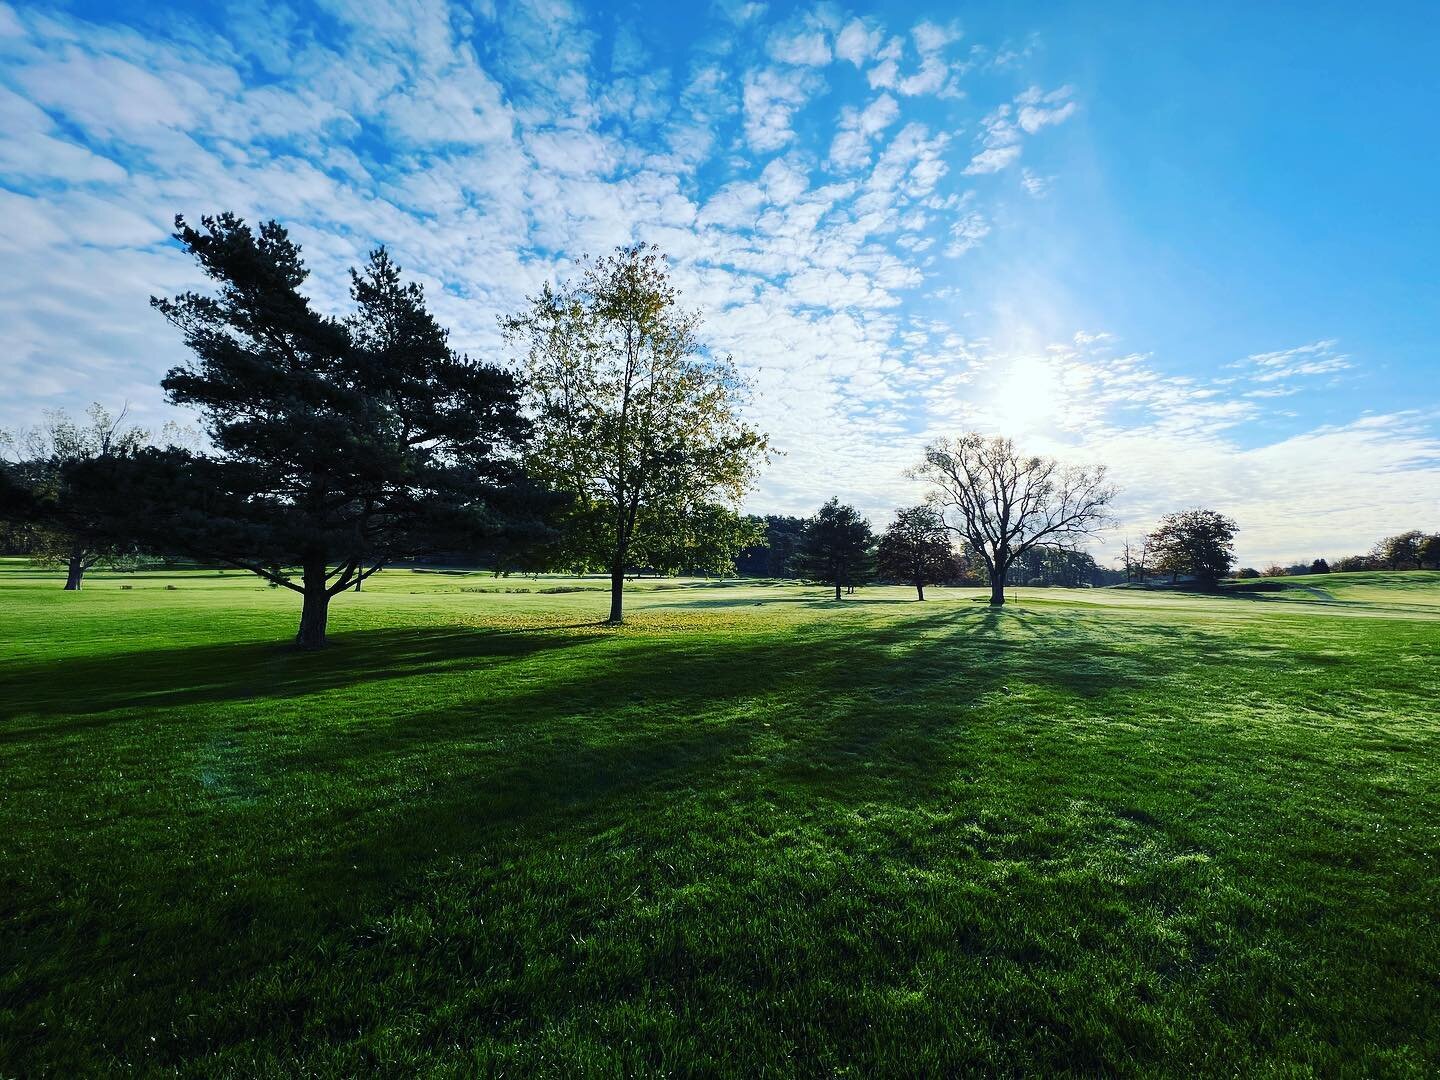 Tis&rsquo; a beautiful morning out there! We only have a few days left and tee times are filling up quickly.  Could hit 60* tomorrow!  Don&rsquo;t miss out, get your tee times today at www.thebathgolfclub.com ! #mainegolf #shipcity #gonavy #fallgolf